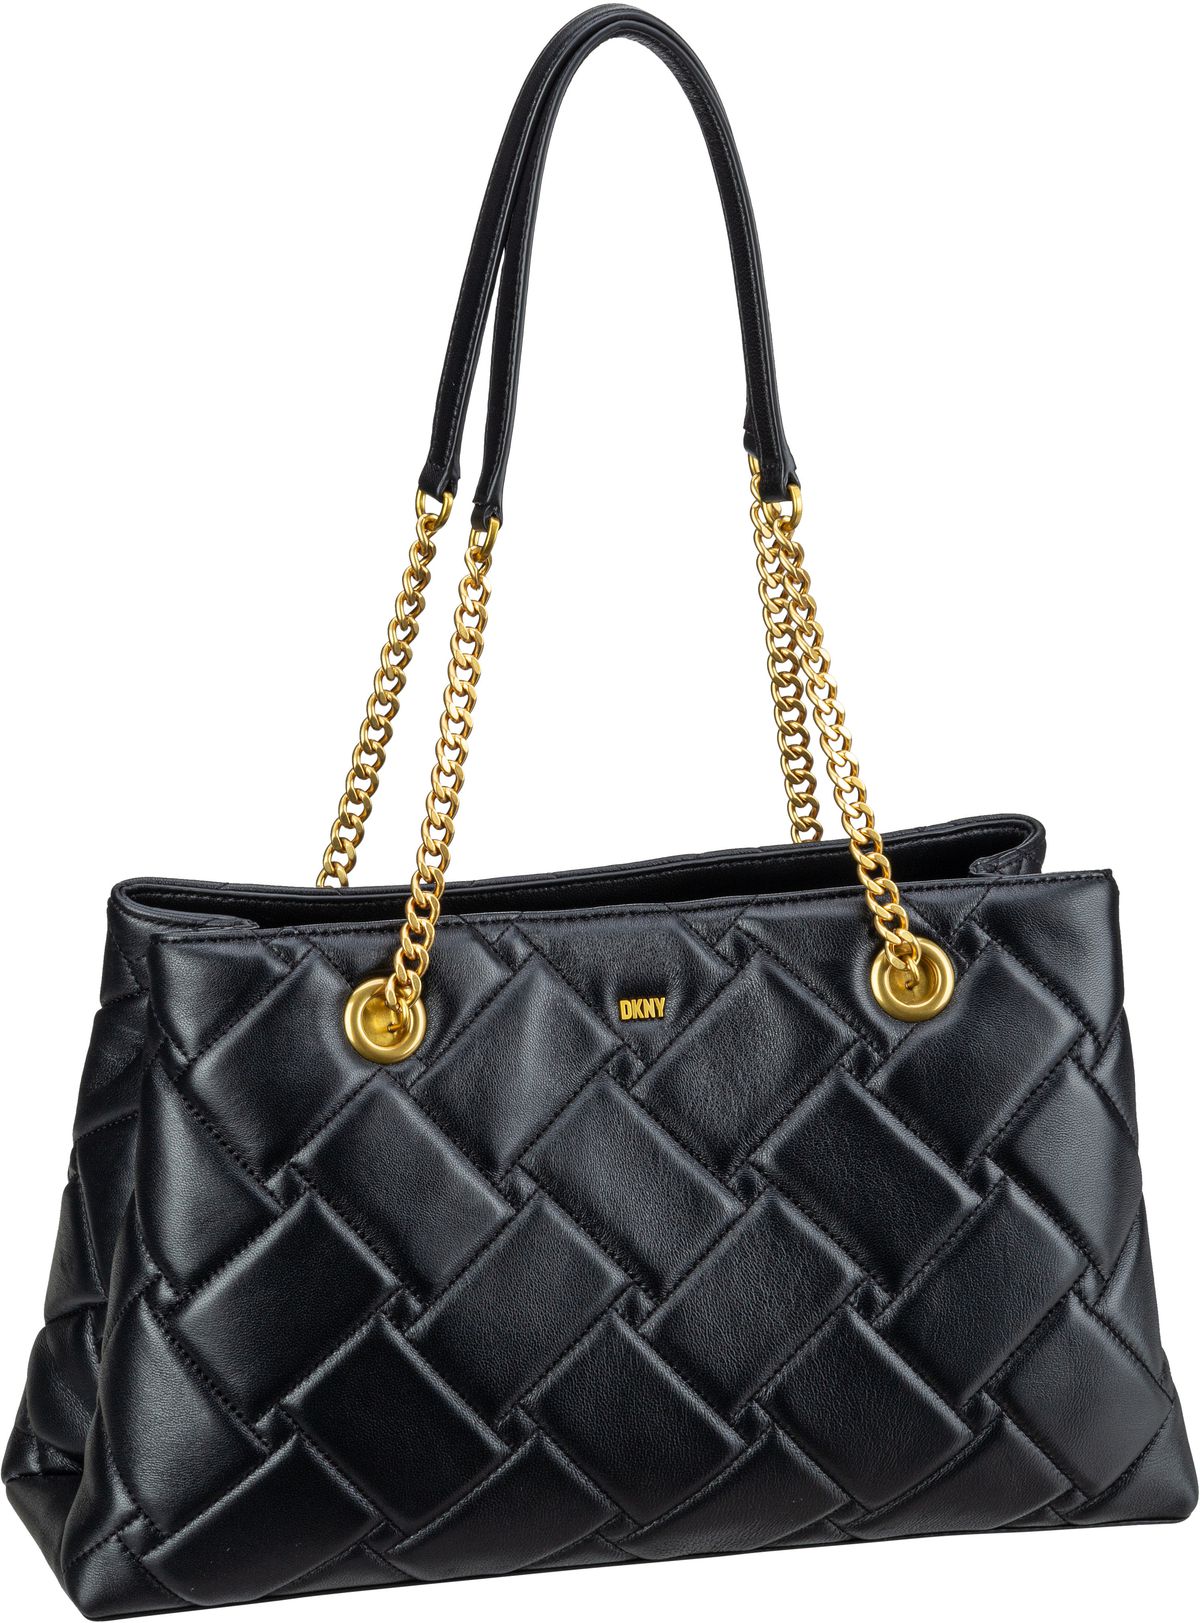 DKNY Willow Tote - Black/Gold